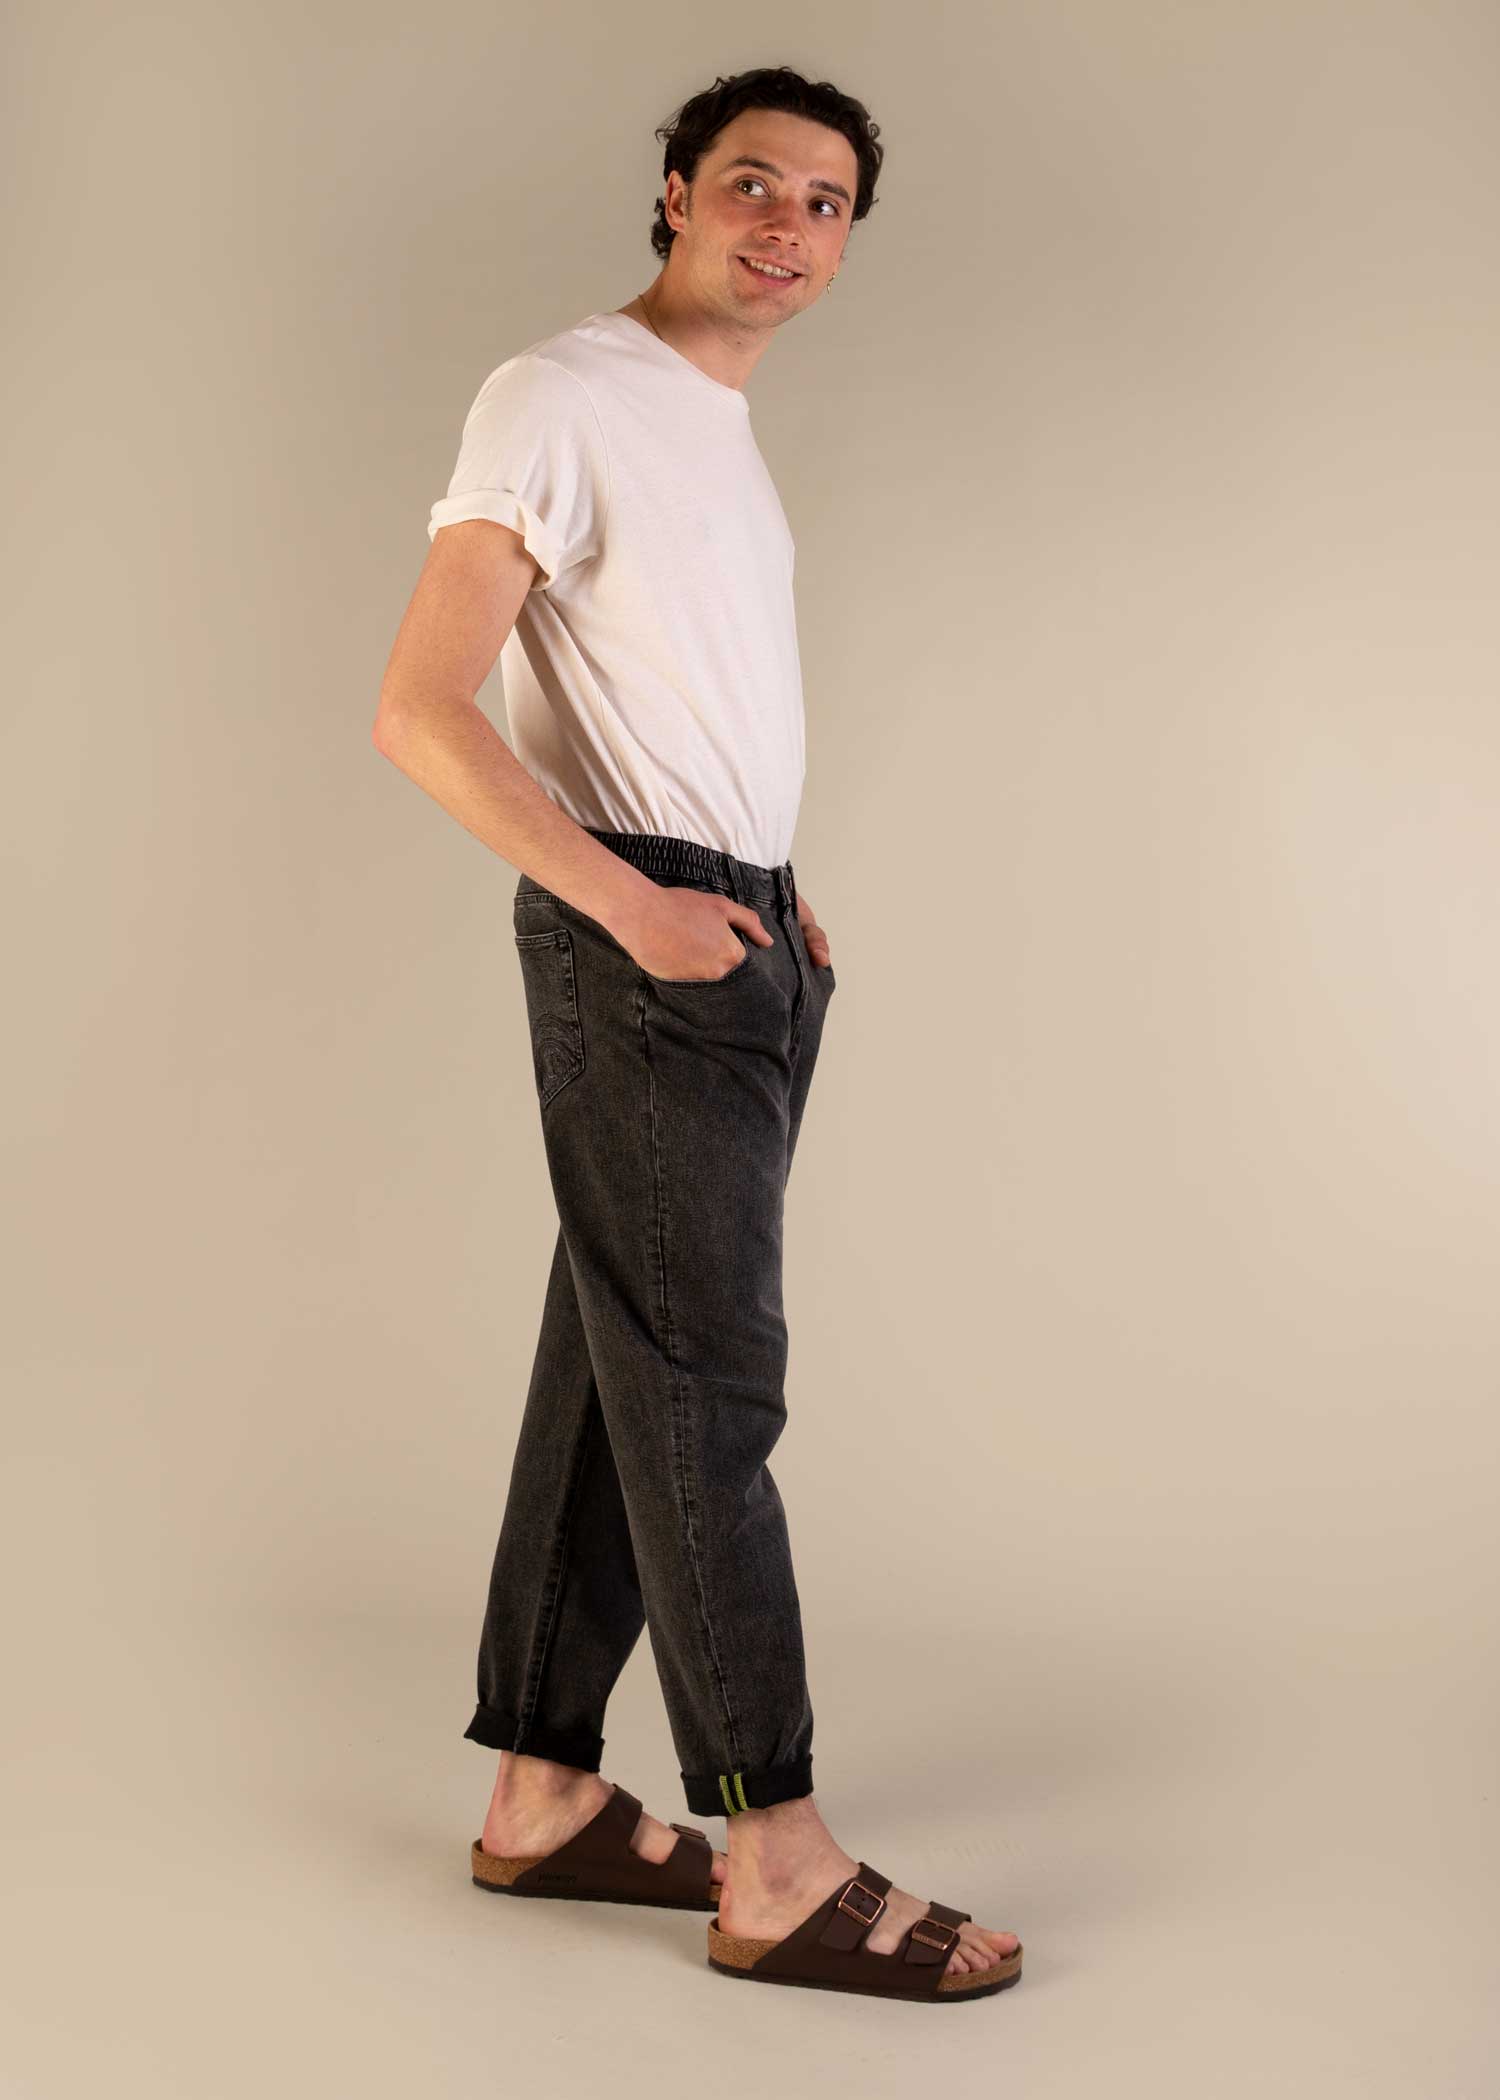 3RD ROCK sustainable climbing and outdoor jeans- Kai is 6ft 1" with a 32" waist & 33" inseam, and is wearing a 32 RL. M